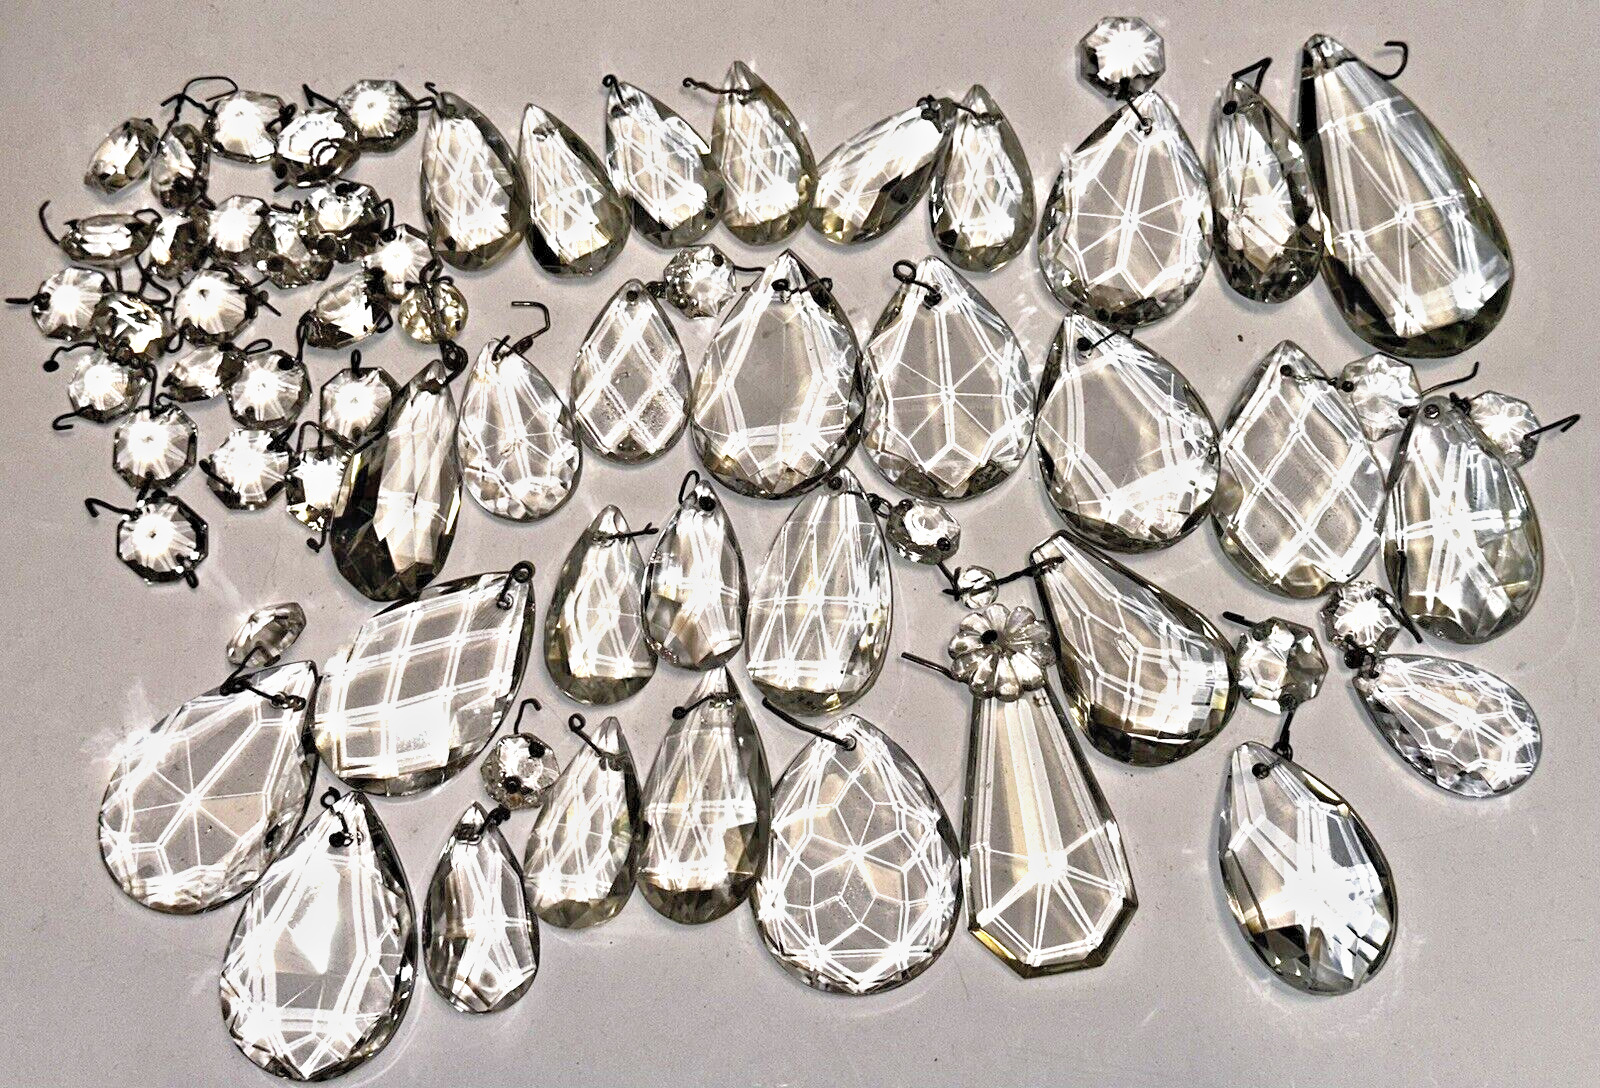 Lot of 30 Vintage Almond Pendalogue Faceted Crystals / Prisms Assorted Sizes